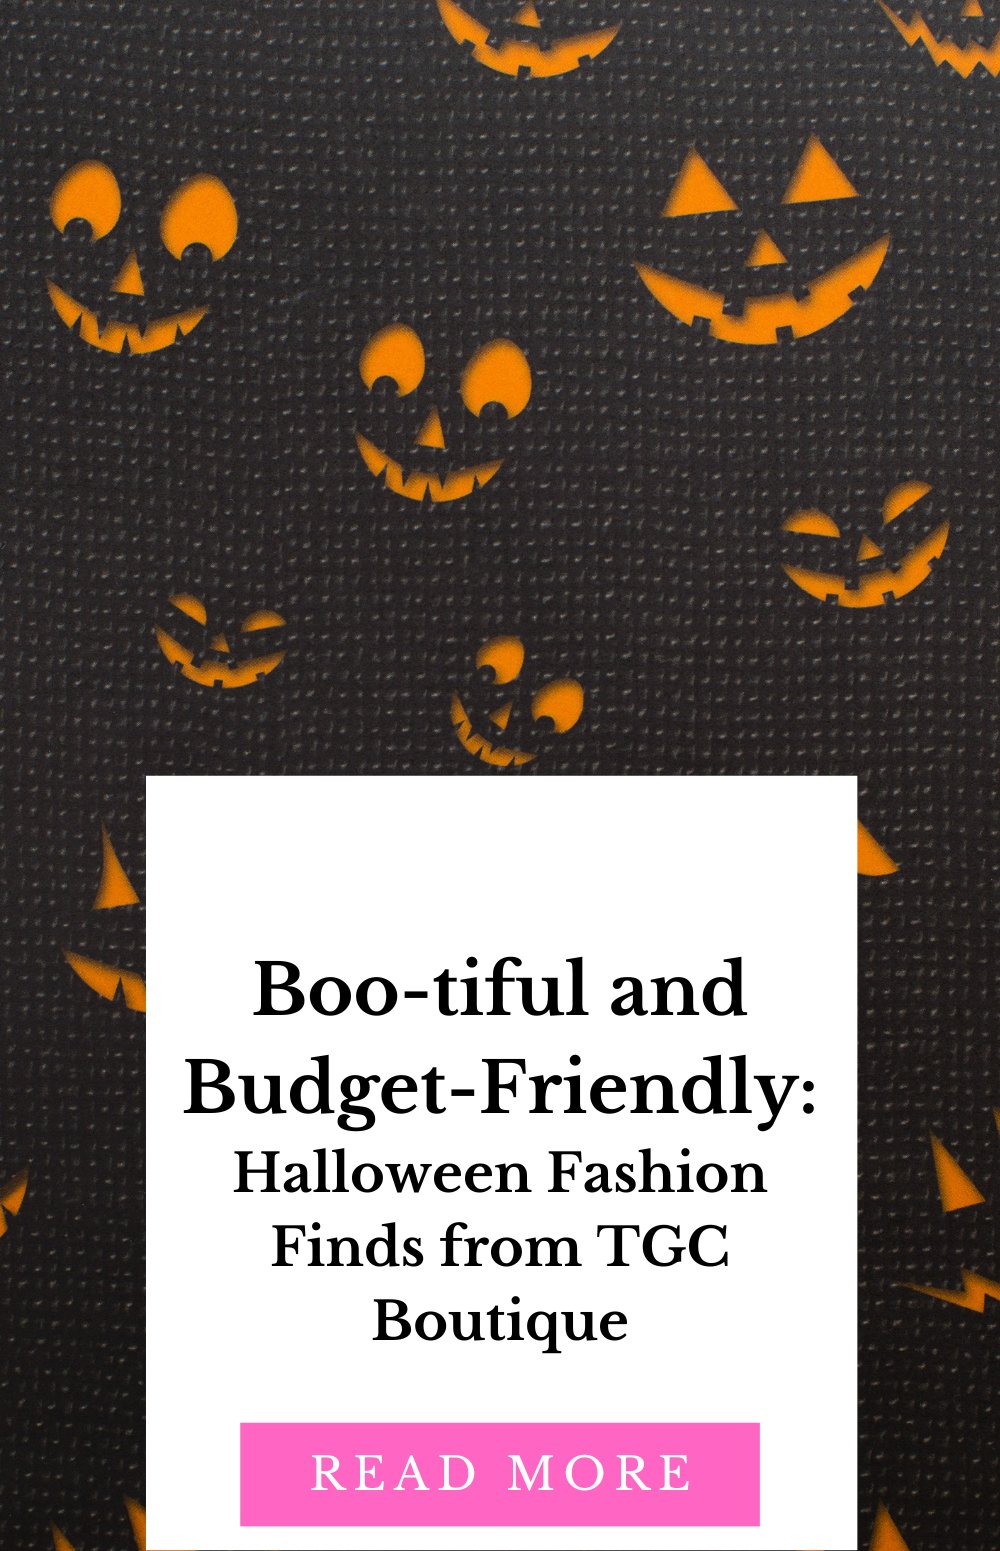 Boo-tiful and Budget-Friendly: Halloween Fashion Finds from TGC Boutique - TGC Boutique